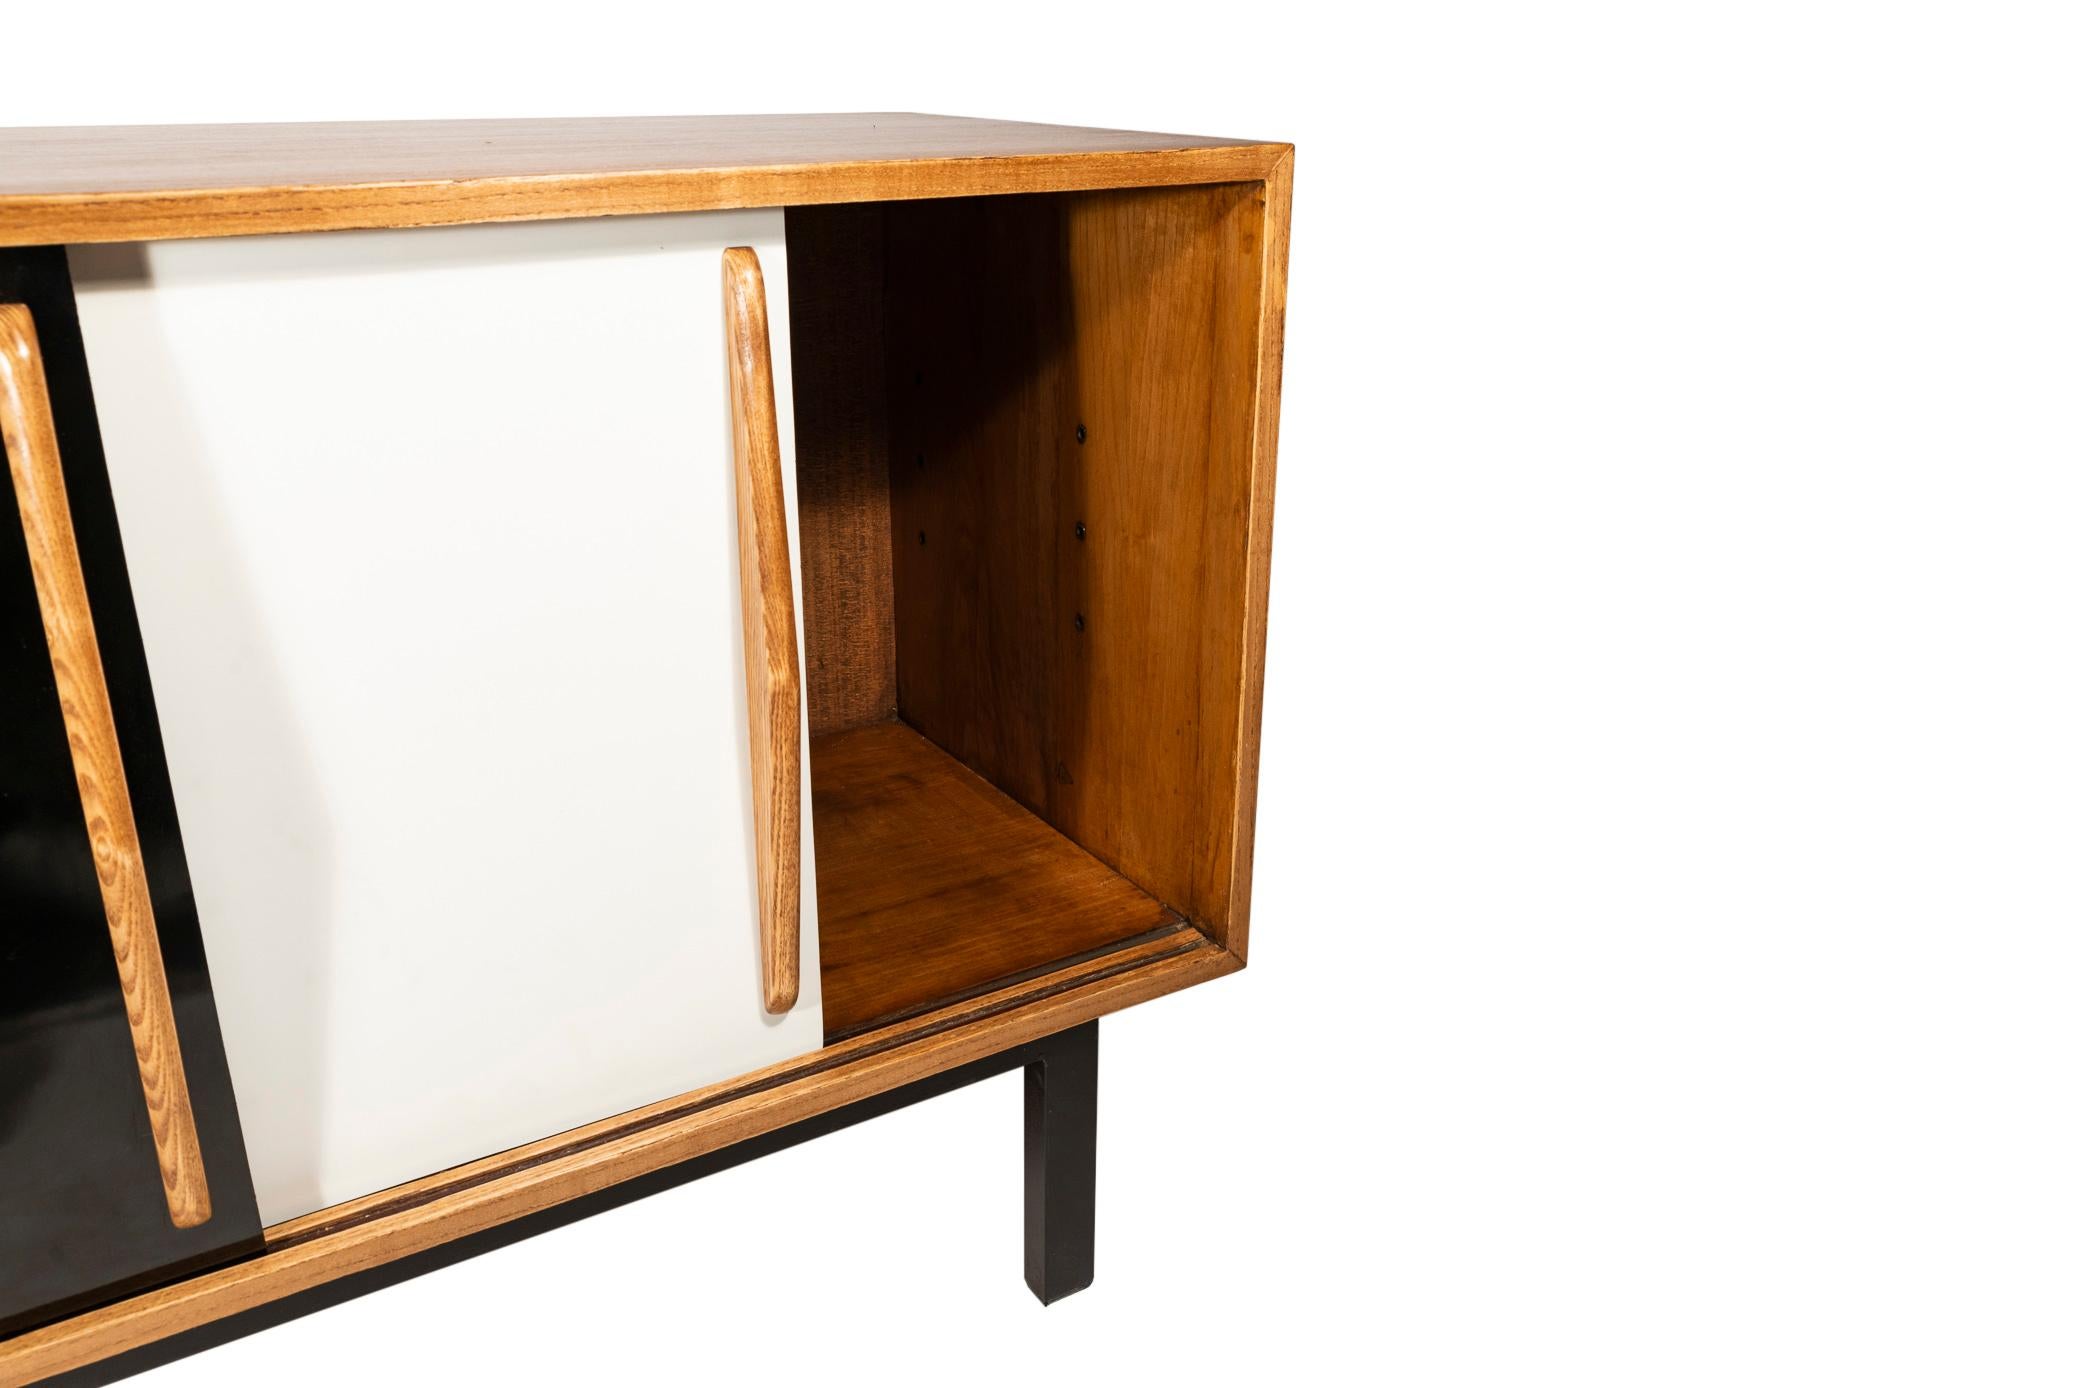 French Charlotte Perriand, Sideboard, France, circa 1958, Cité Cansado